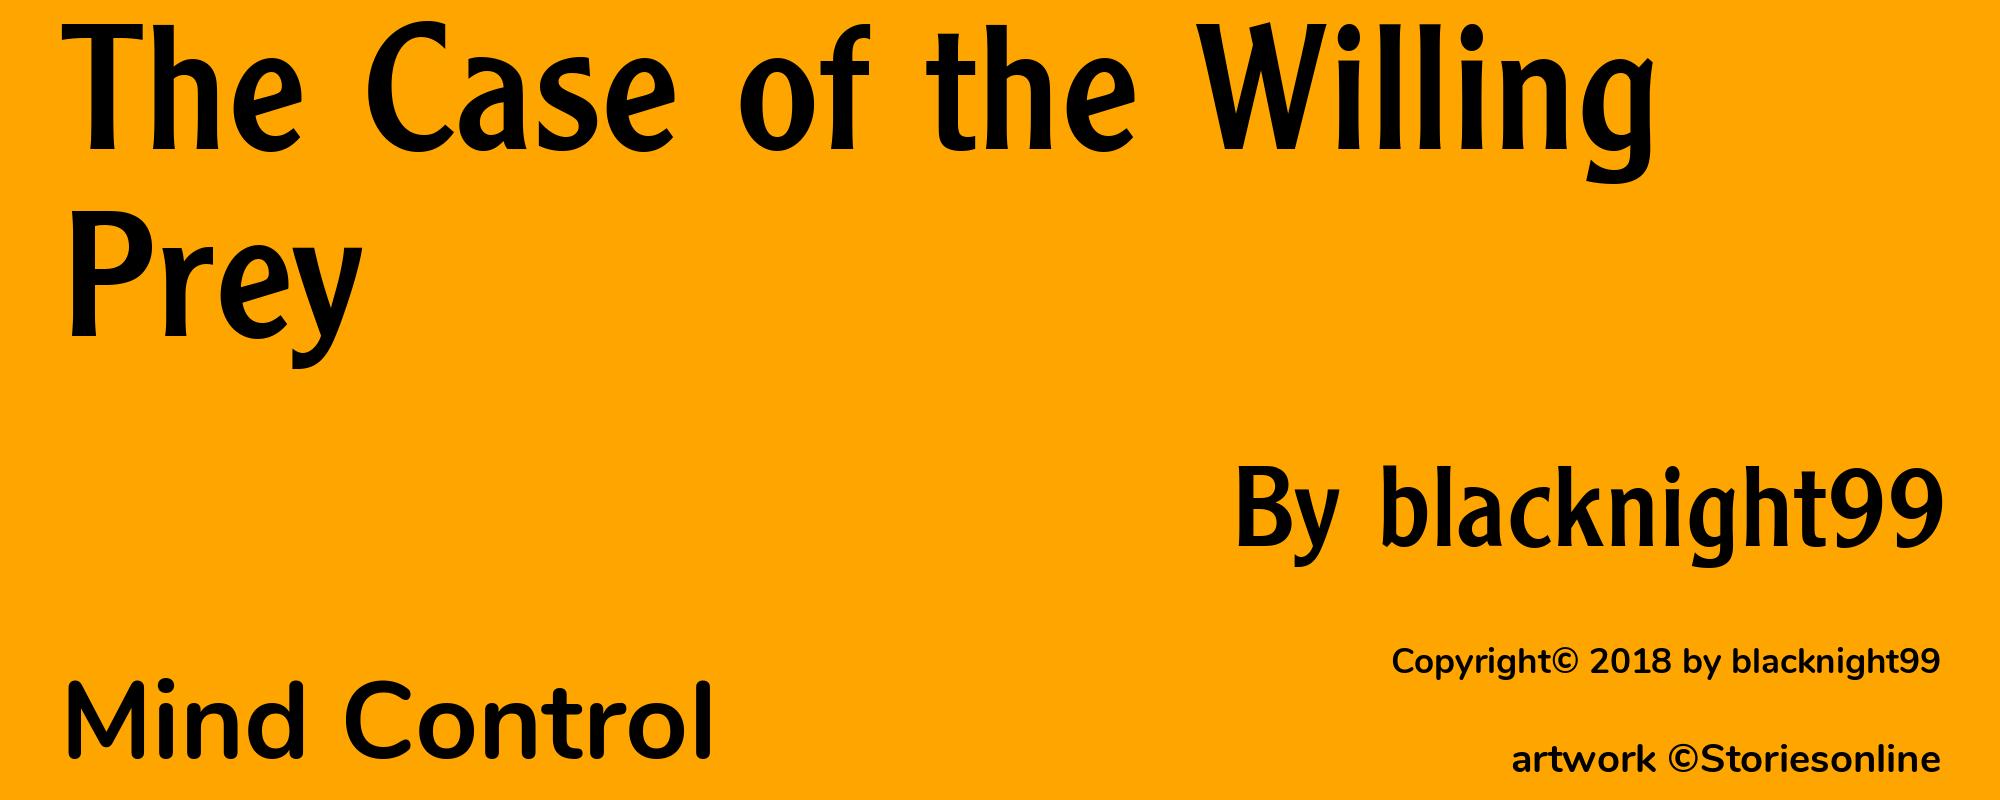 The Case of the Willing Prey - Cover